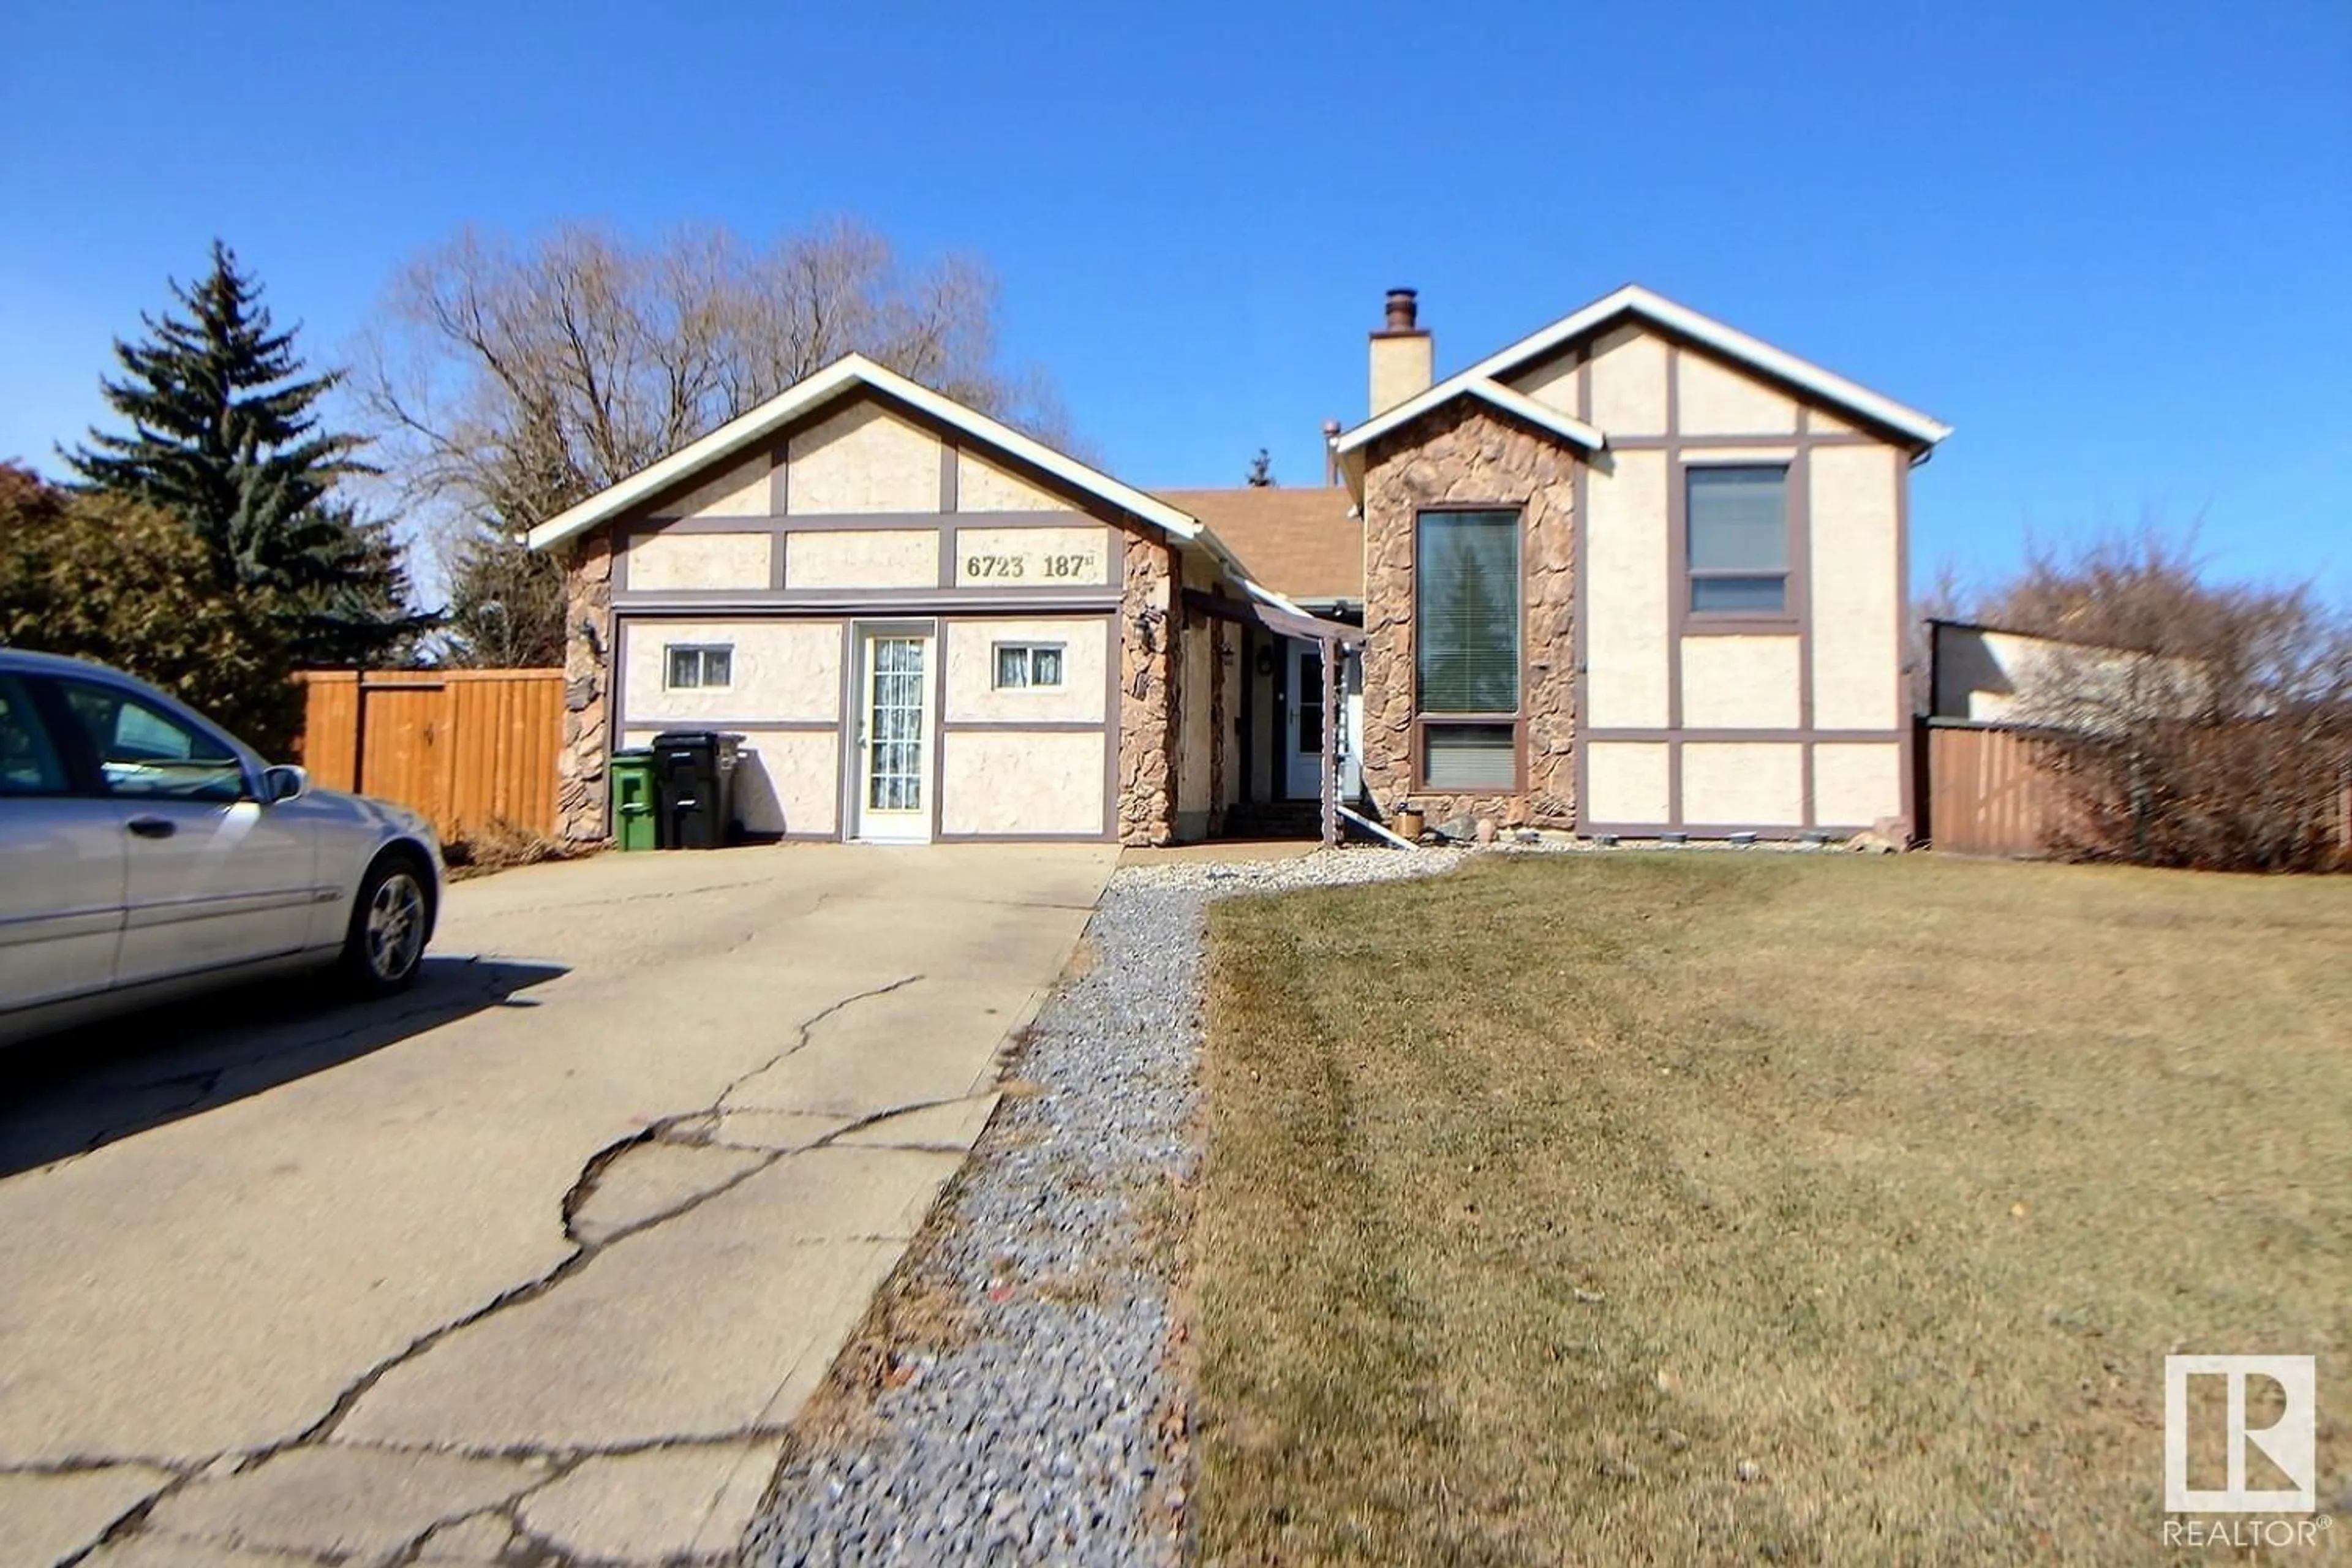 Frontside or backside of a home for 6723 187 ST NW, Edmonton Alberta T5T2M9